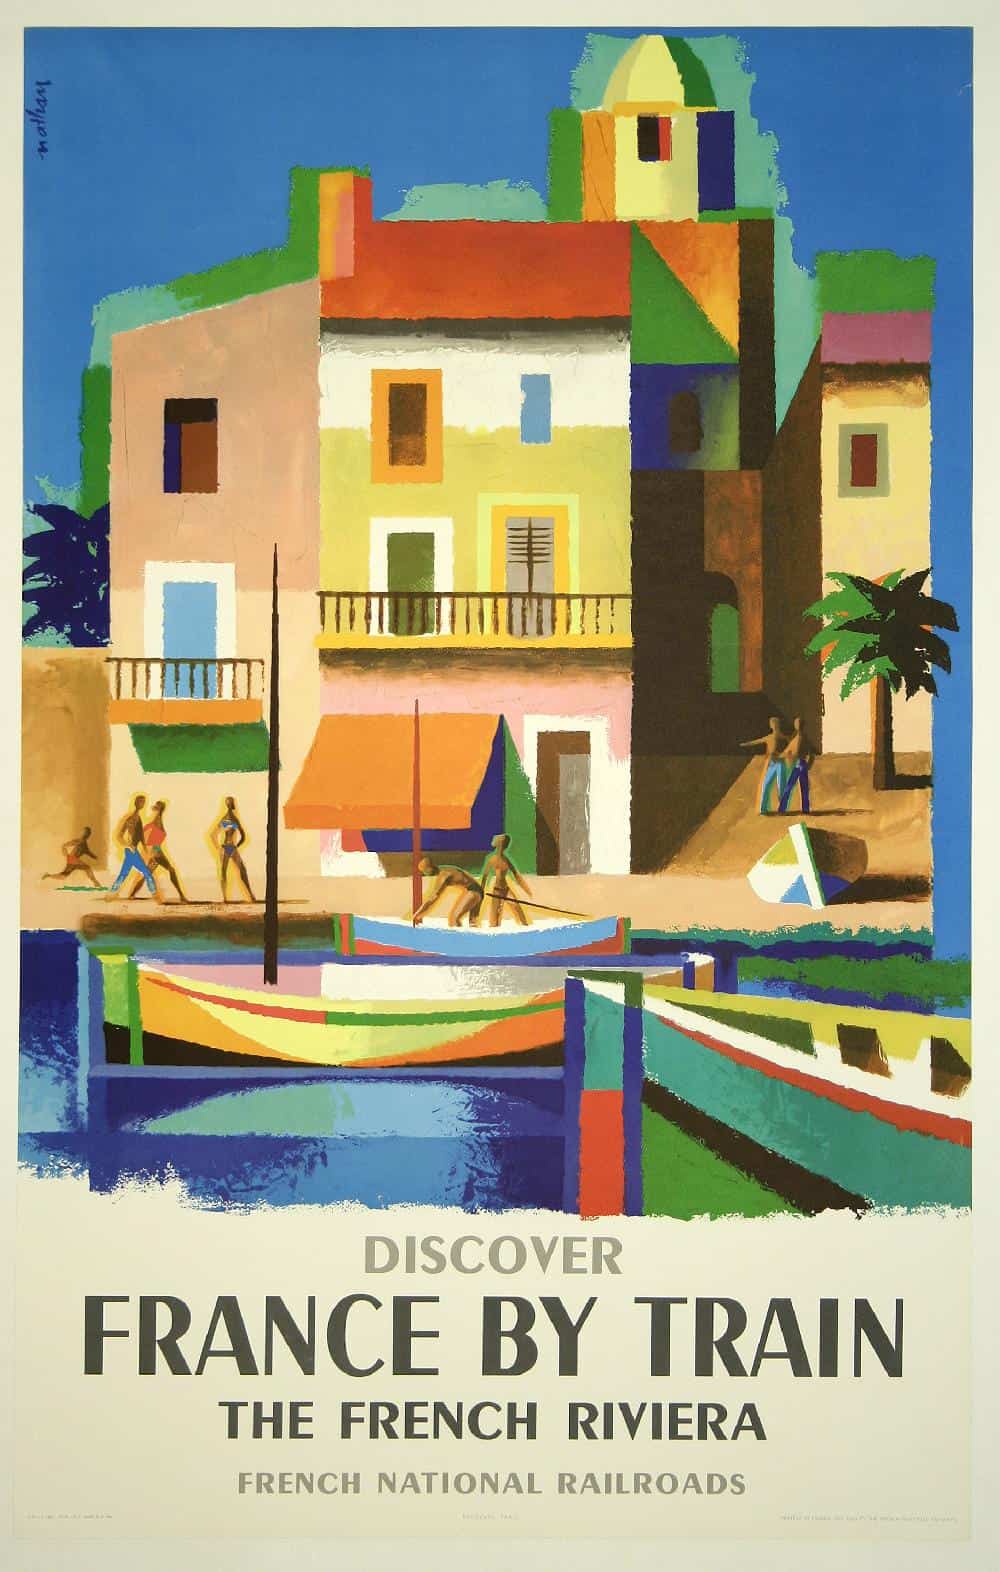 French National Railroads Discover France By Train French Riviera 1960s Vintage Travel Poster